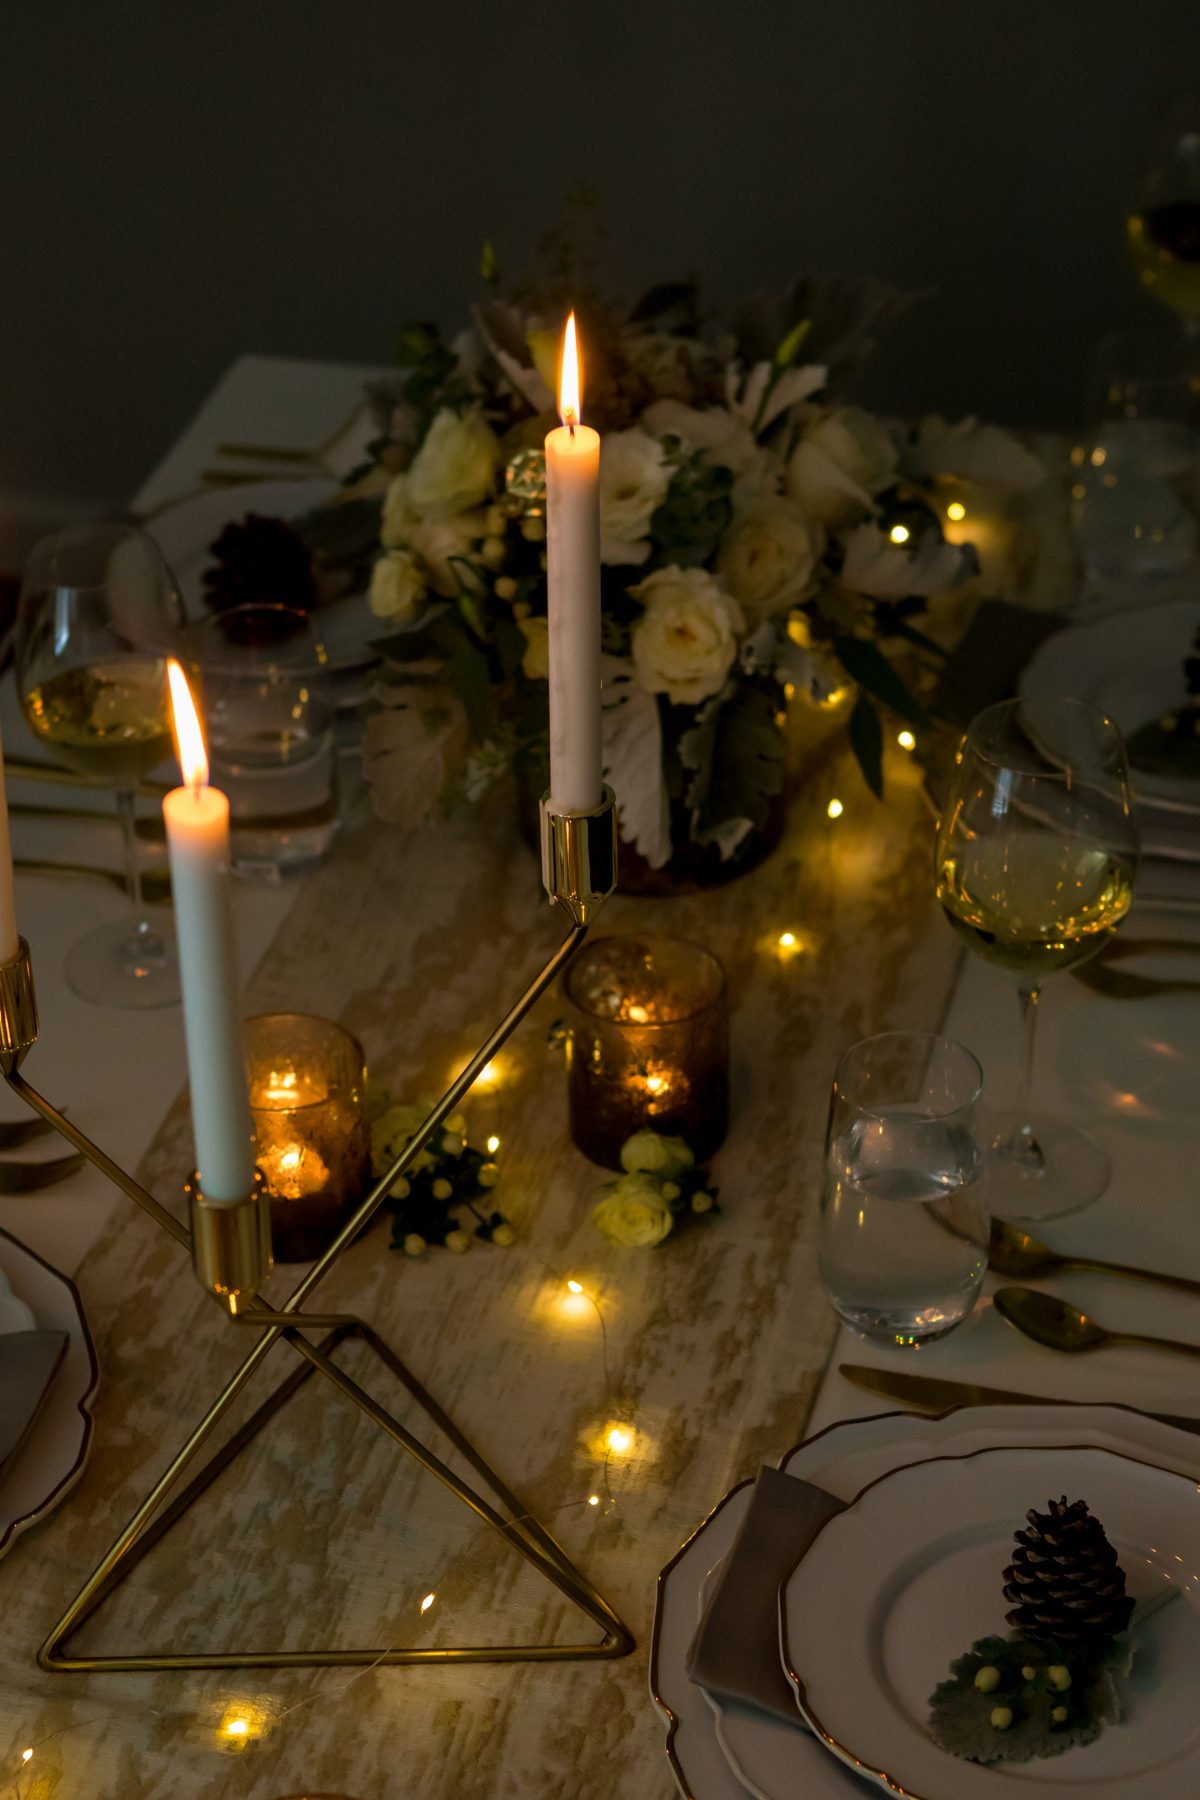 5D4B3916 - Tablescapes - Christmas-candles